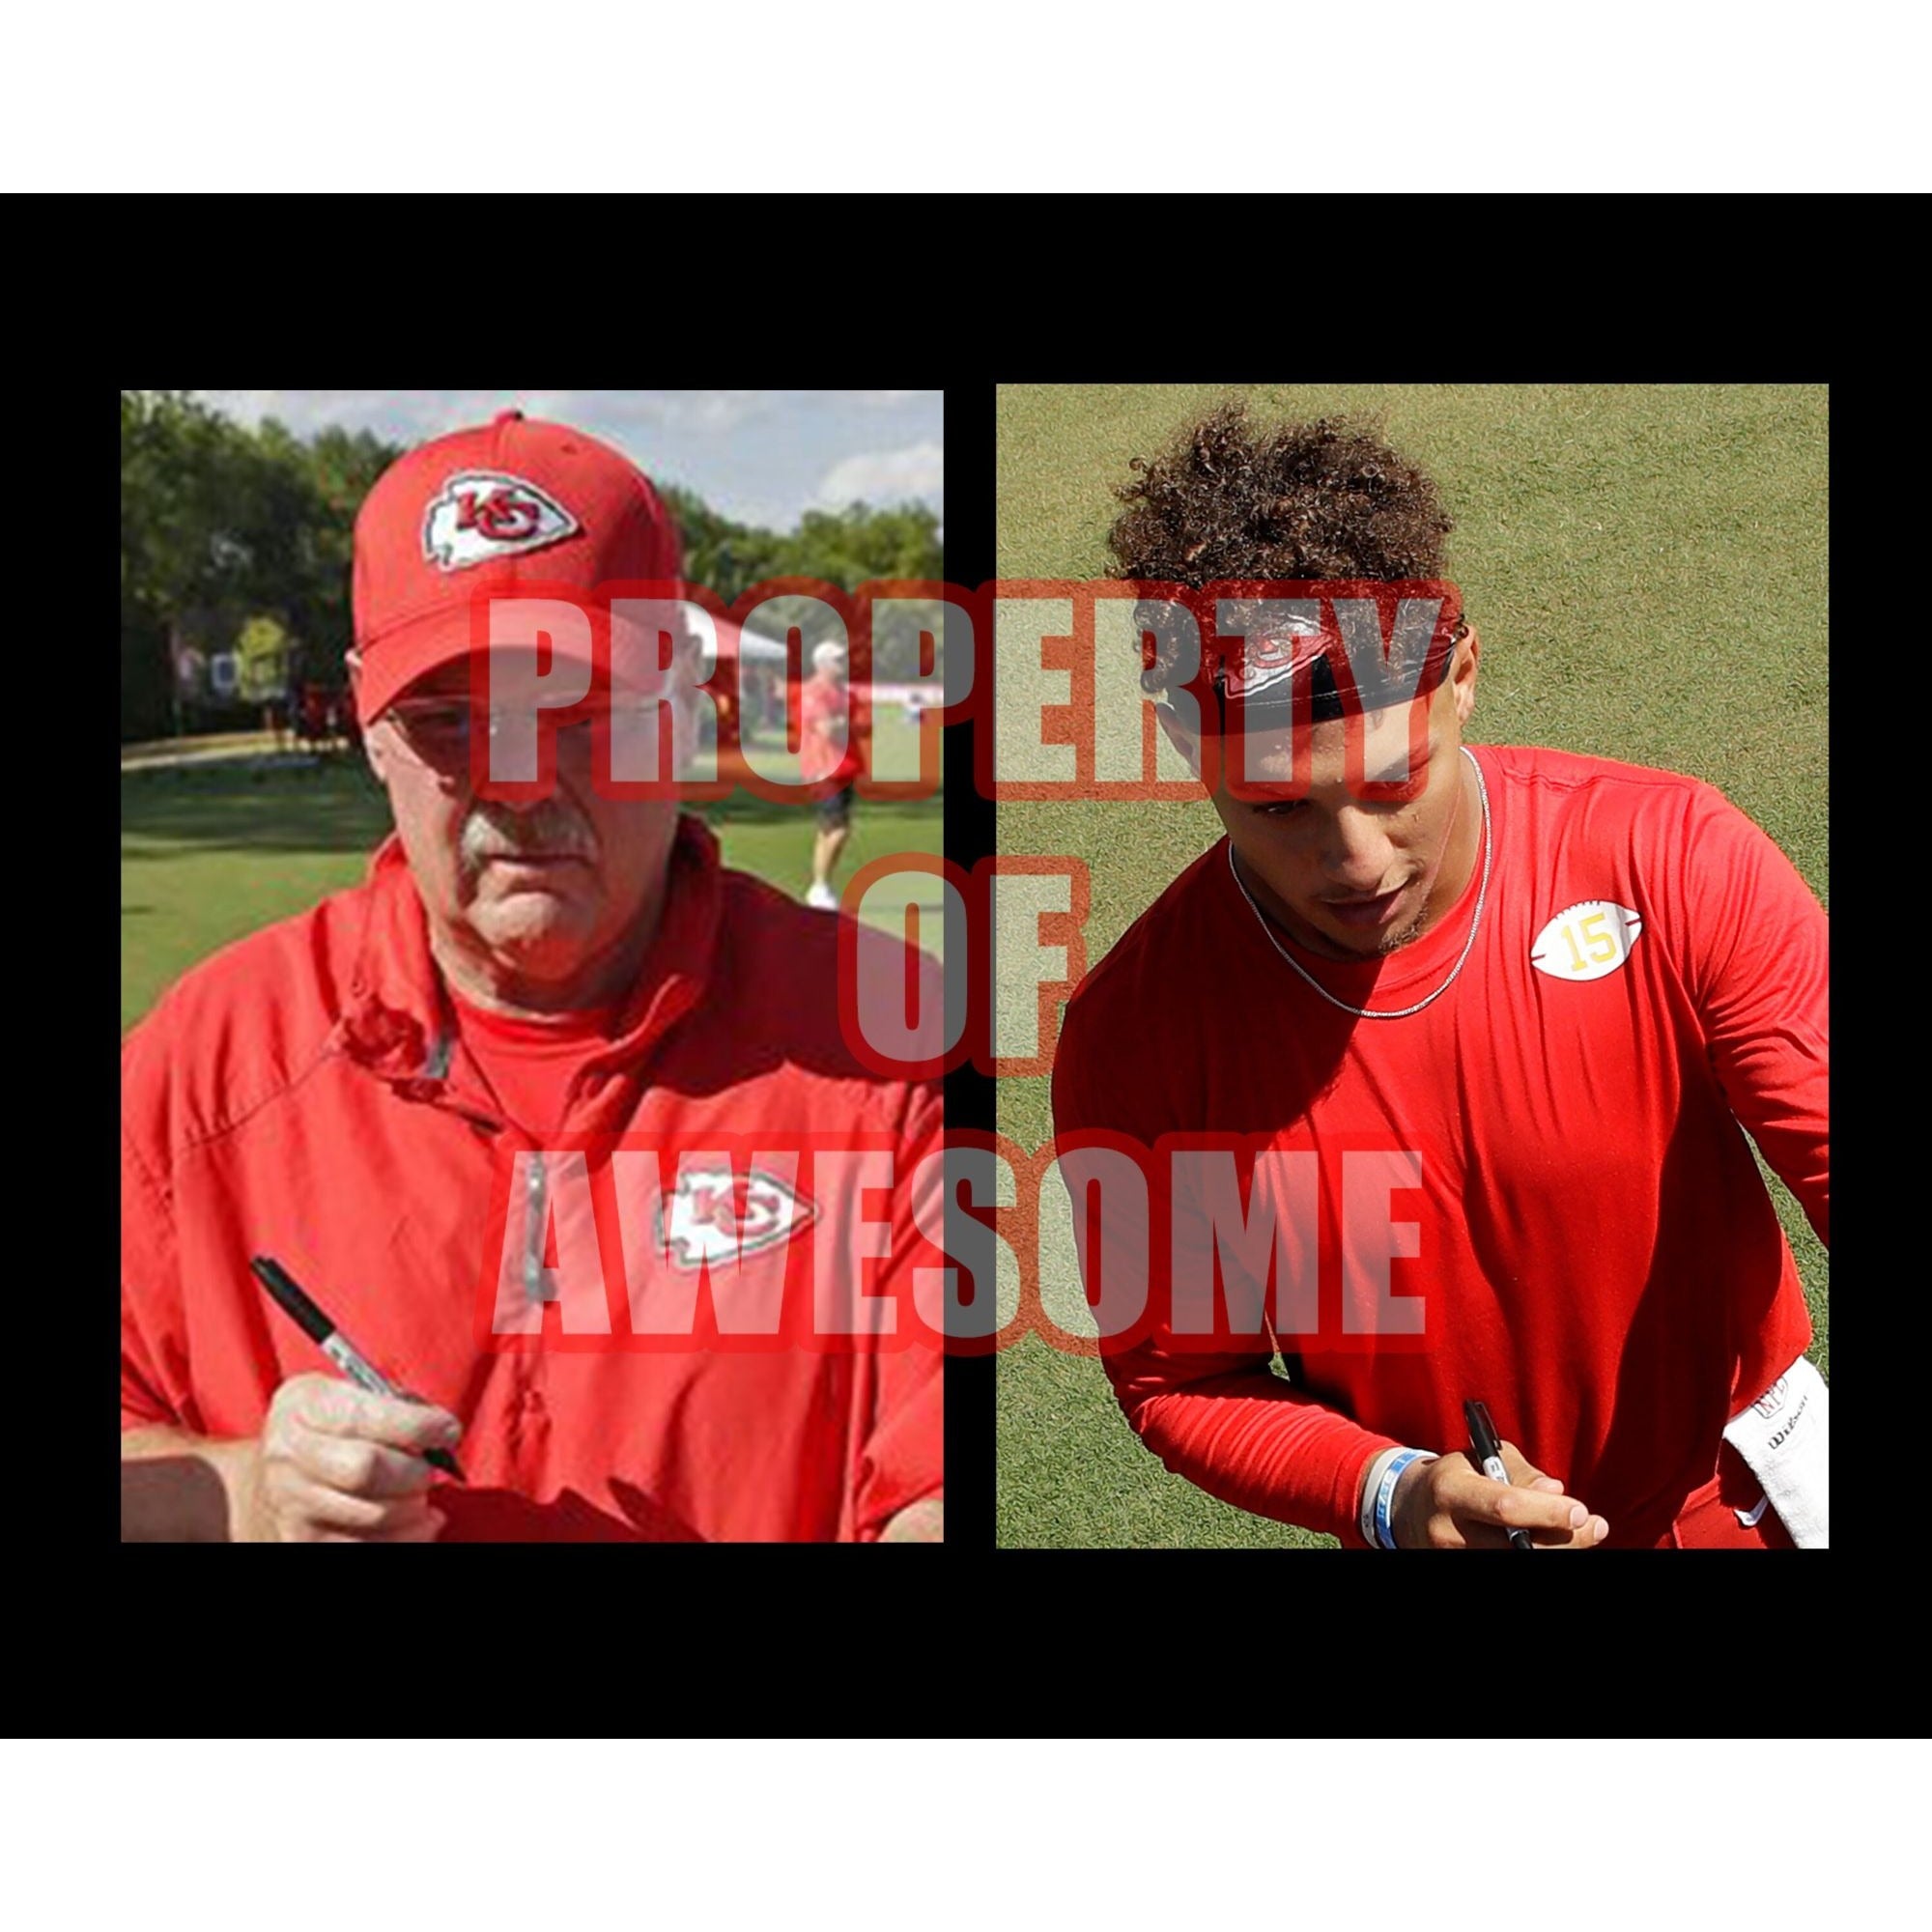 Kansas City Chiefs Patrick Mahomes and Andy Reid 8 x 10 signed photo with proof